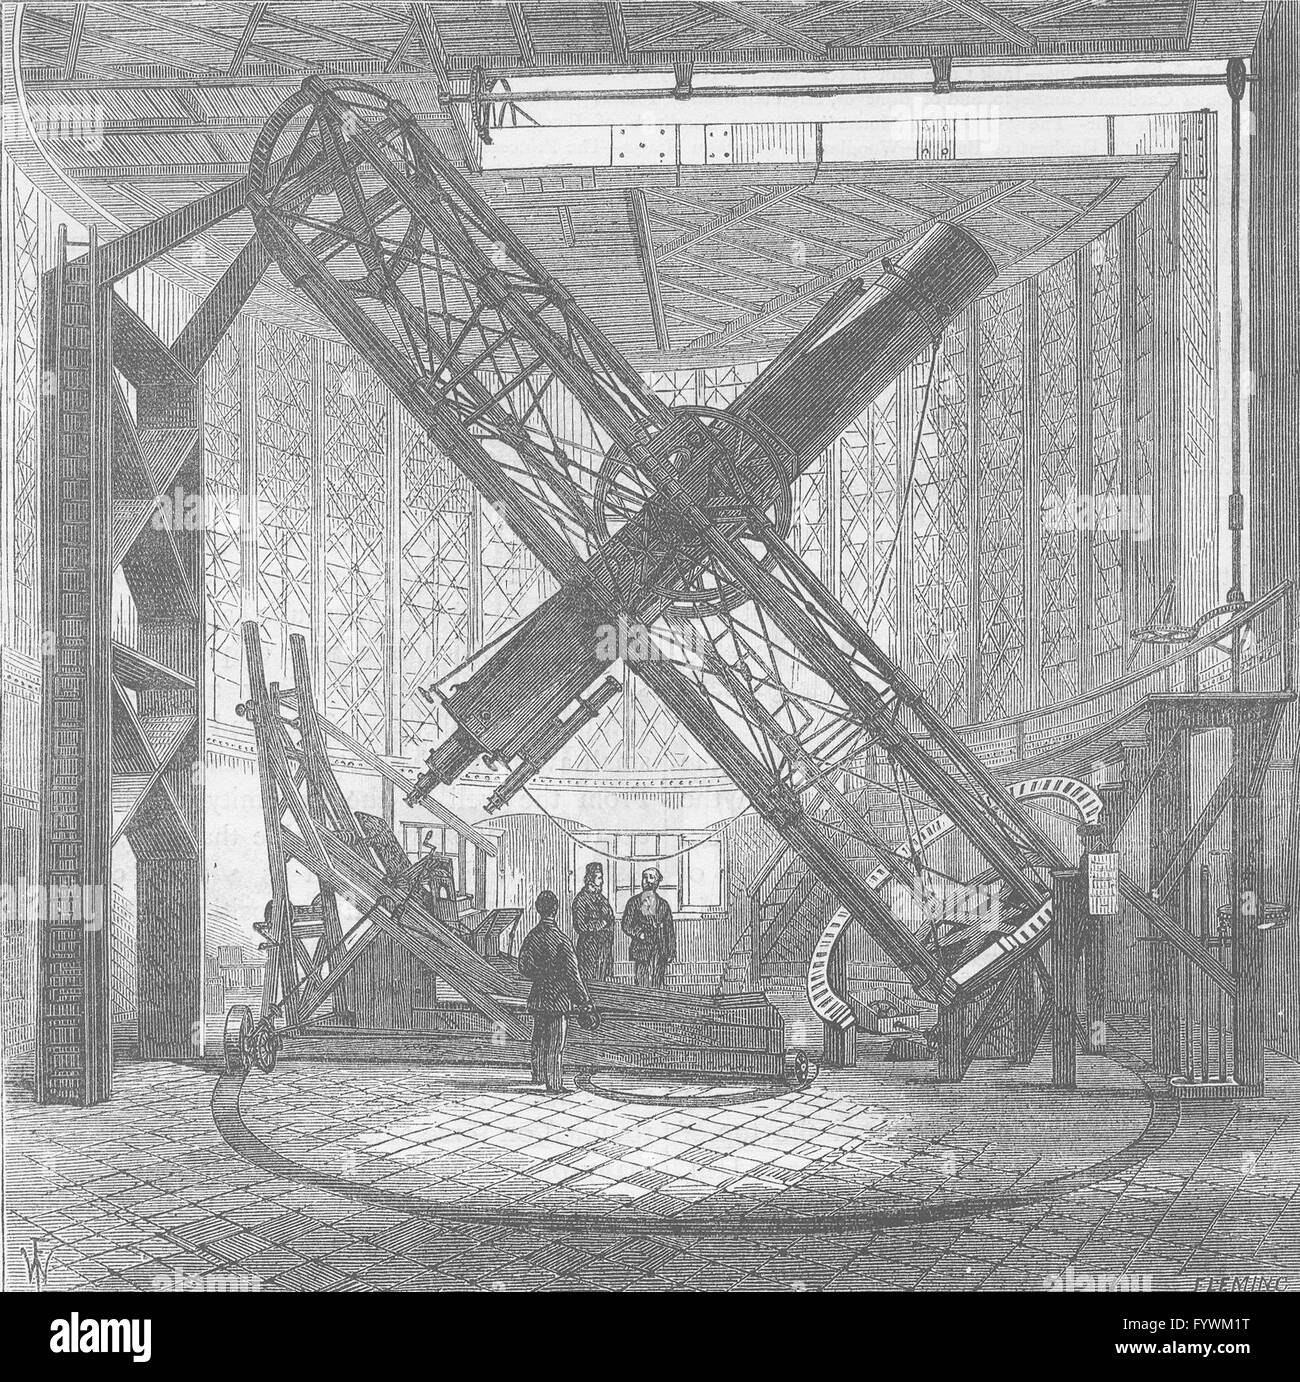 GREENWICH OBSERVATORY: The Great Equatorial Telescope in the Dome. London, c1880 Stock Photo